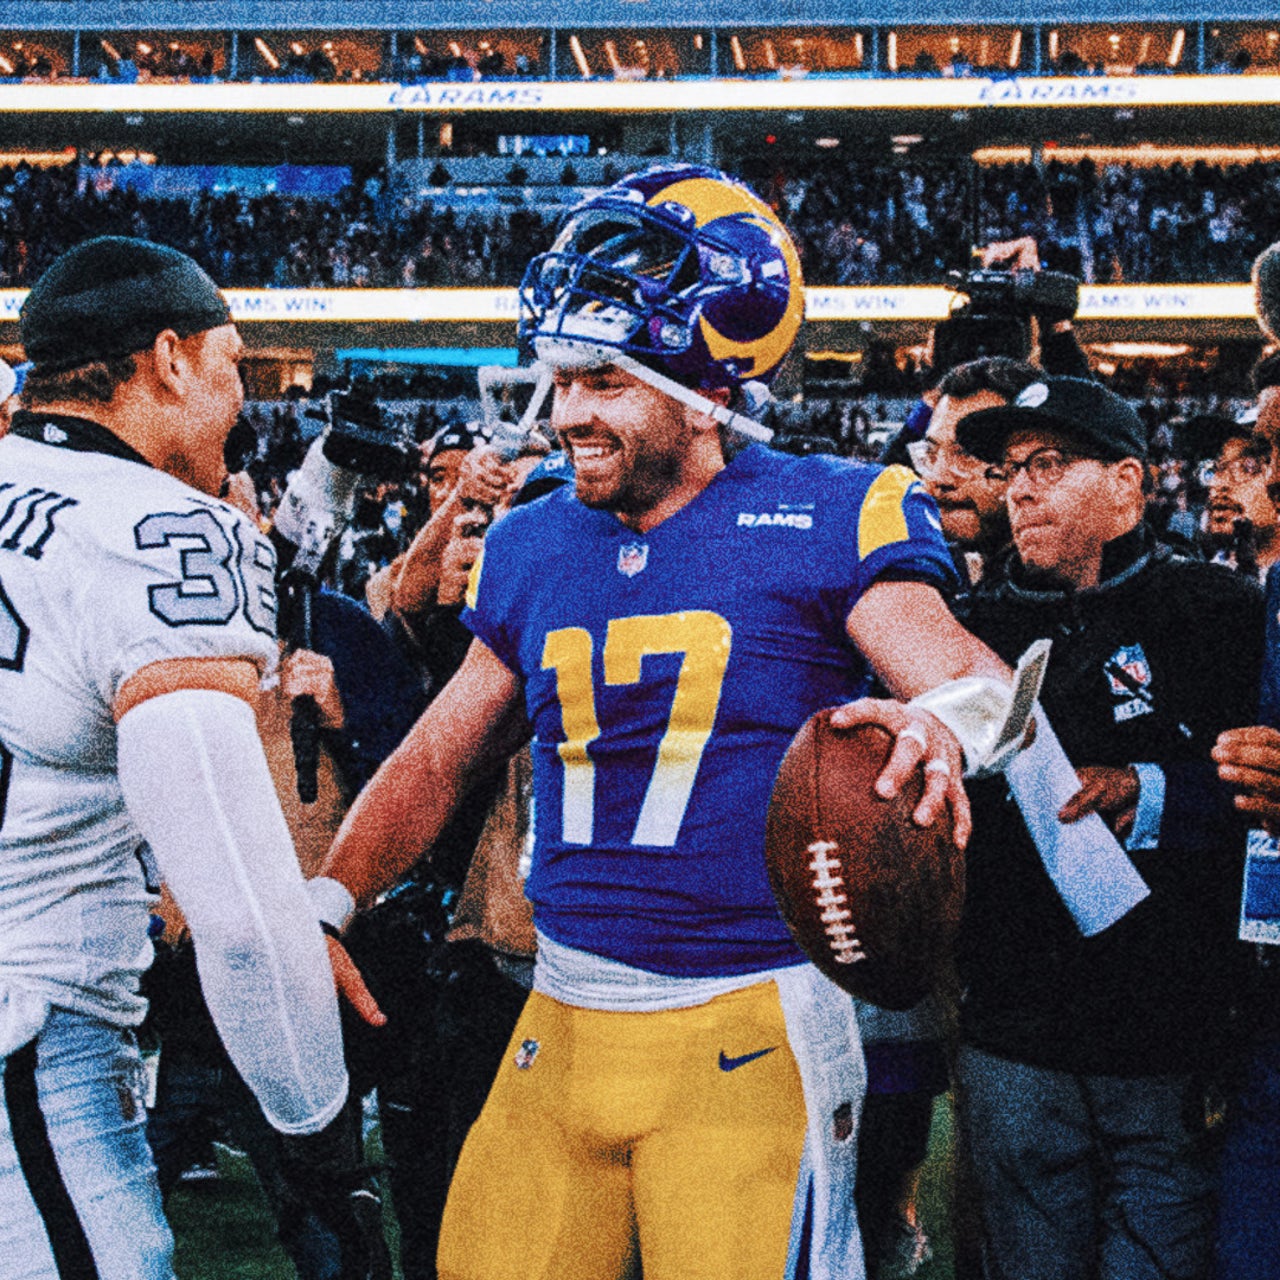 Social media reacts to Baker Mayfield, Rams' wild comeback over Raiders